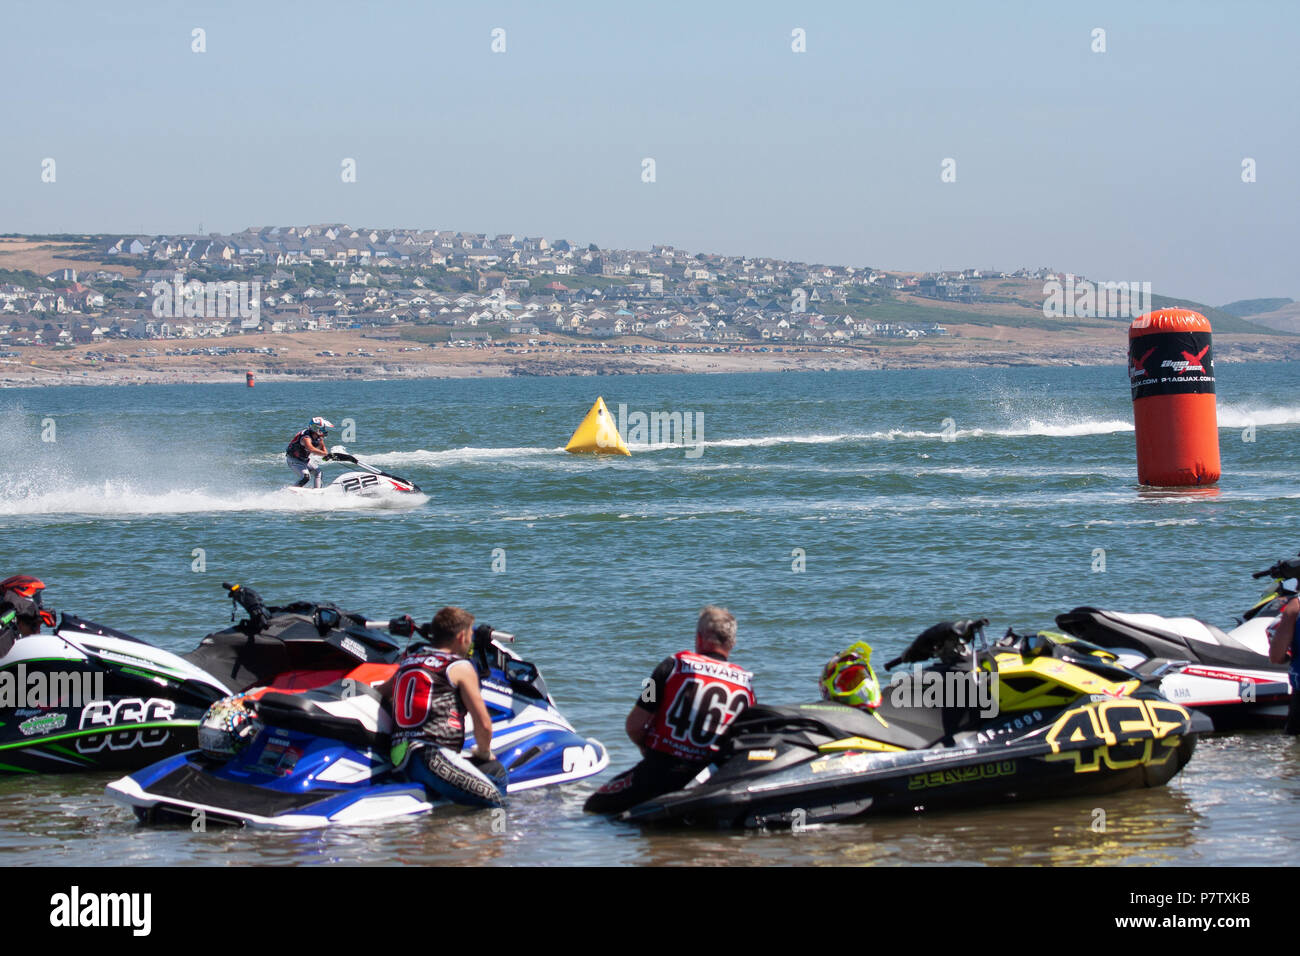 Newton Beach, Porthcawl, Wales, 07 July,2018. Competitors relaxing during The 2018 AquaX UK Championships which is a round National race series of high speed, adrenaline-packed P1 Aqua Cross jet ski racing. Credit Andrew William Megicks/Alamy Live News Stock Photo